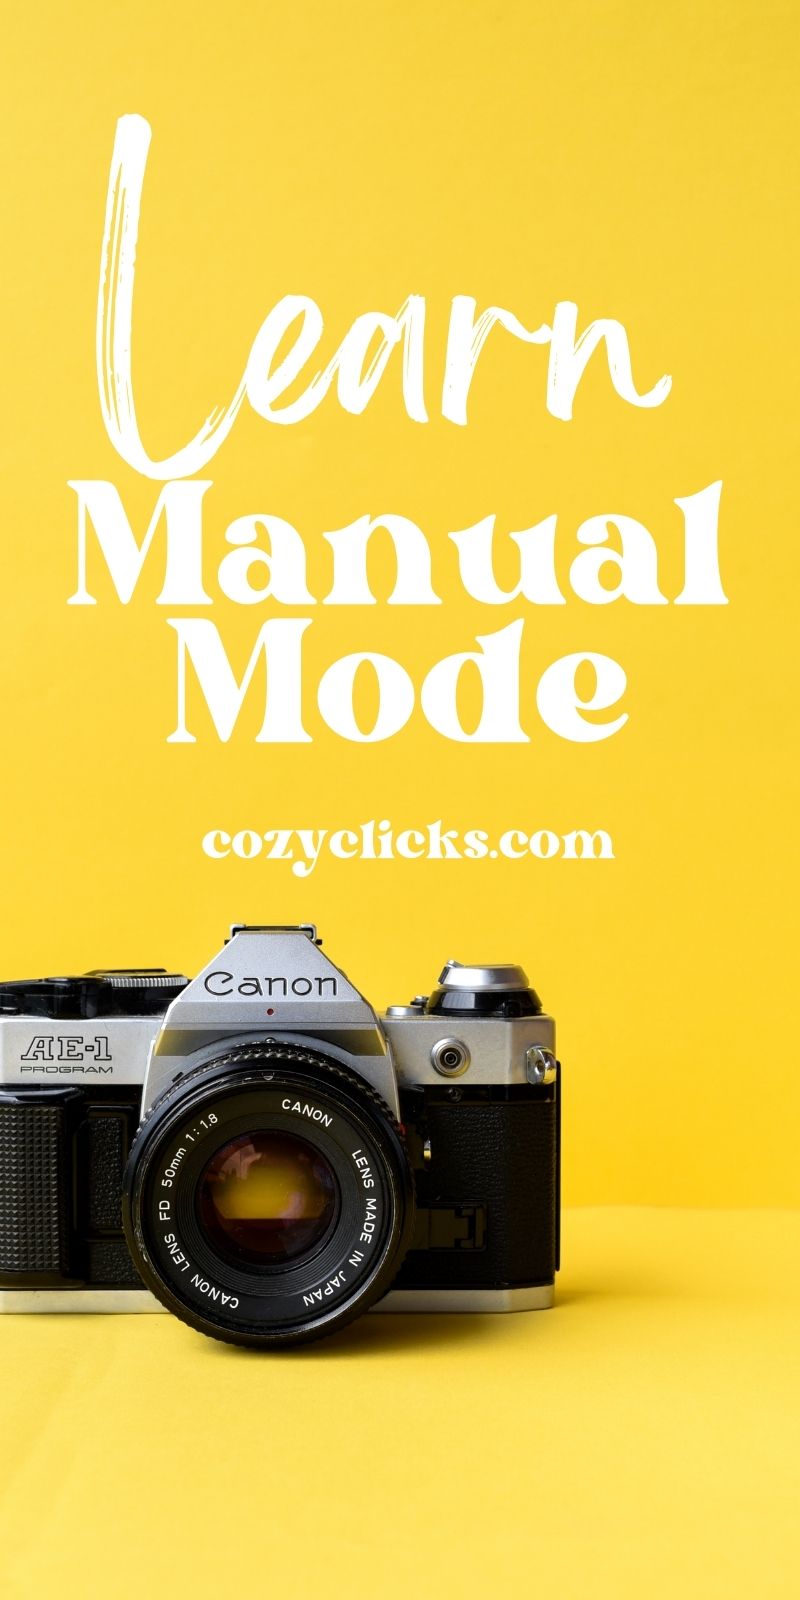 Learn how to use manual mode with your new camera! Easy to follow instructions so that you can understand manual mode and take pictures that are clear and professional looking!